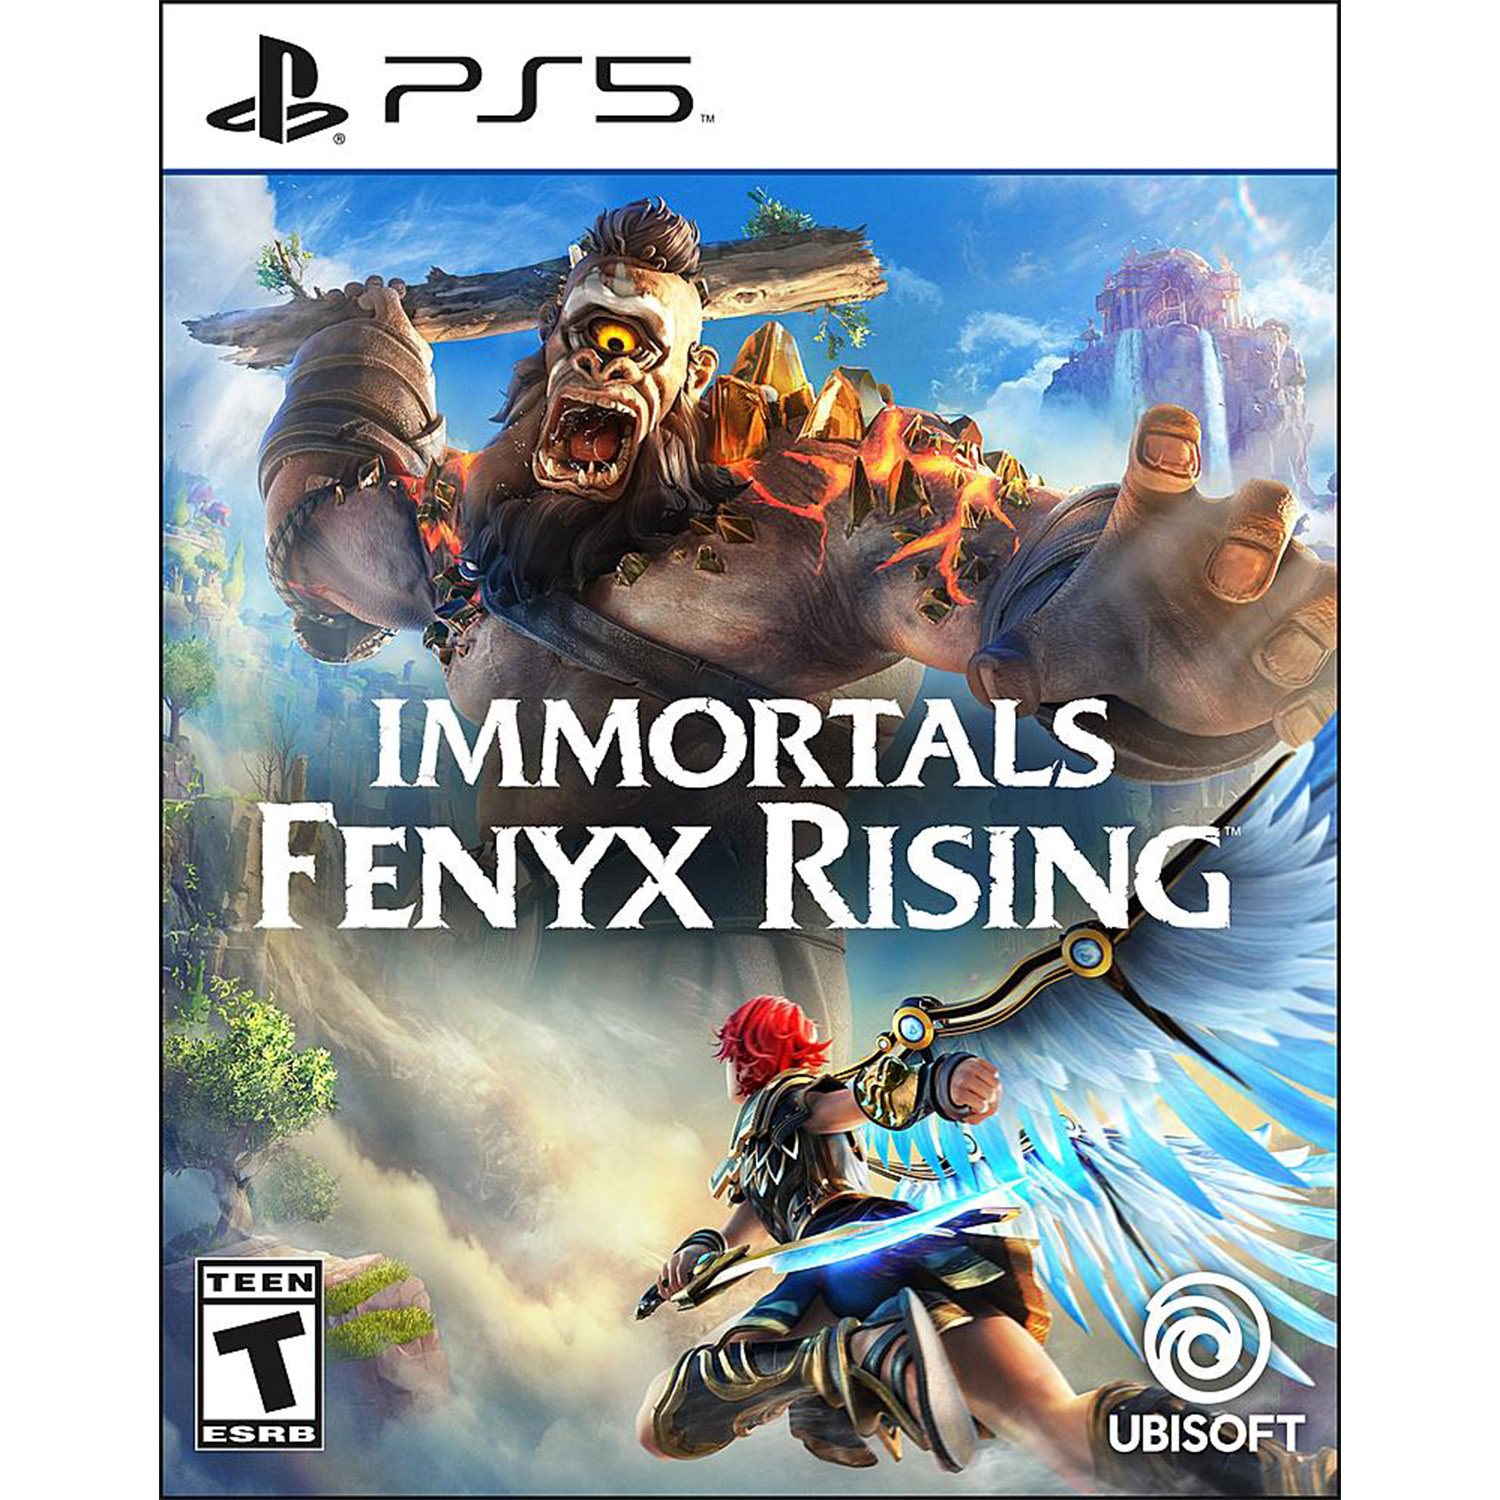 Resident Evil Village And Immortals Fenyx Rising - Two Games For PS5 - $137.59